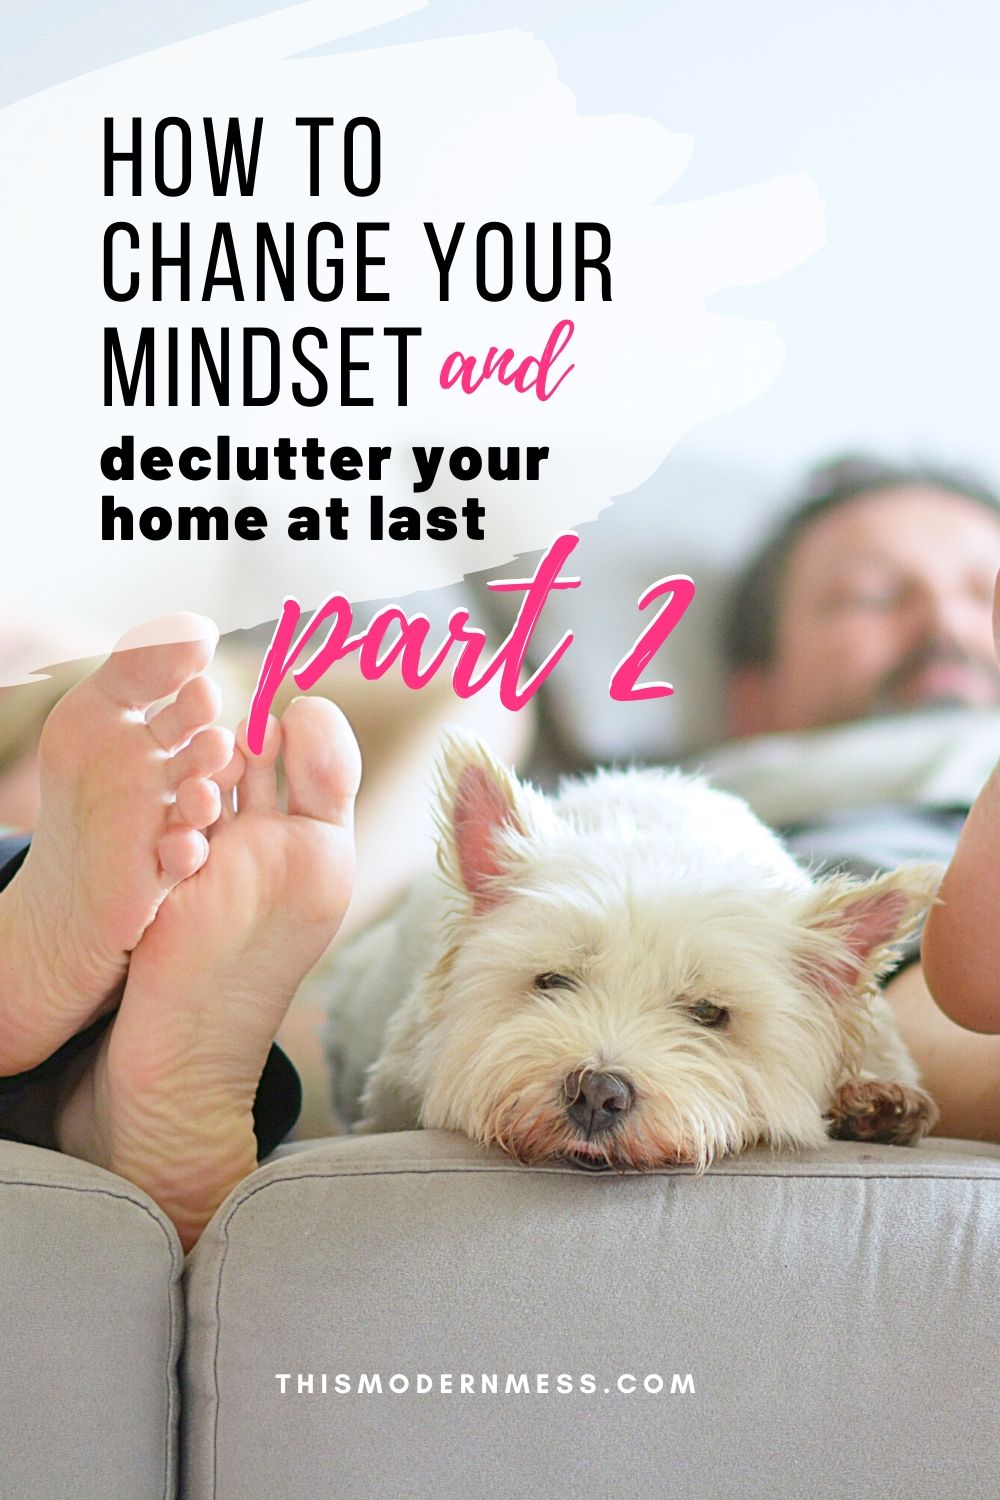 How to Change Your Mindset and Declutter Your Home at Last, Part 2